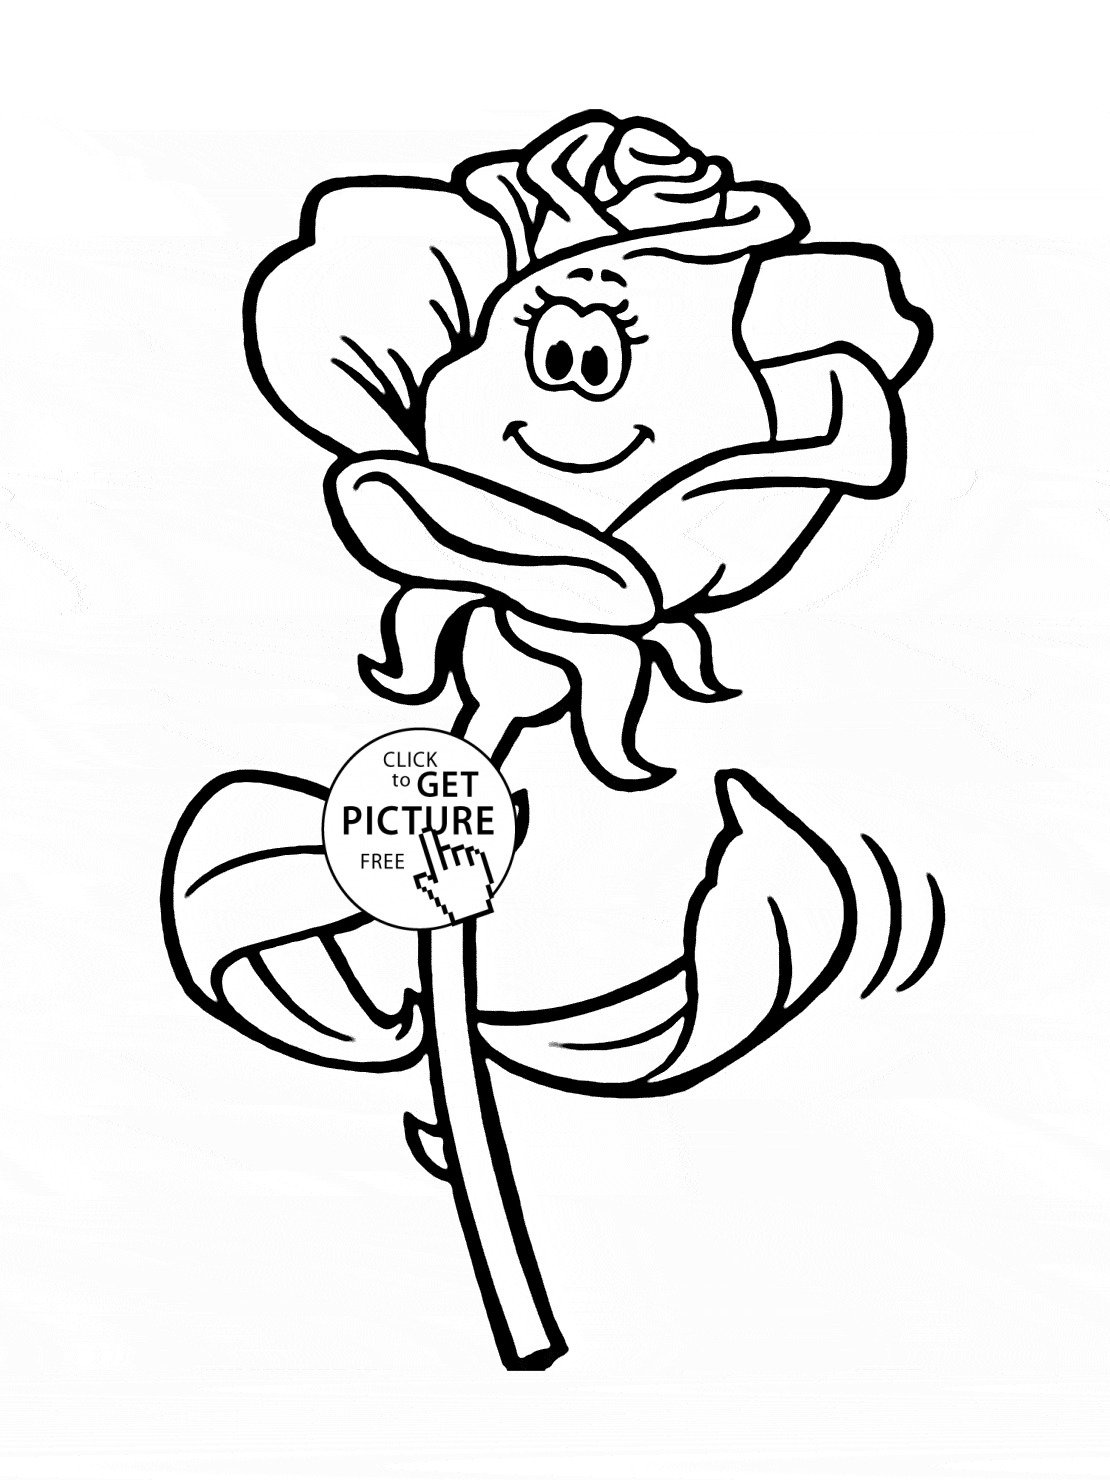 Flowers Coloring Pages Free Printable Coloring Pages Fabulous Floweroloring Pages To Print Photo